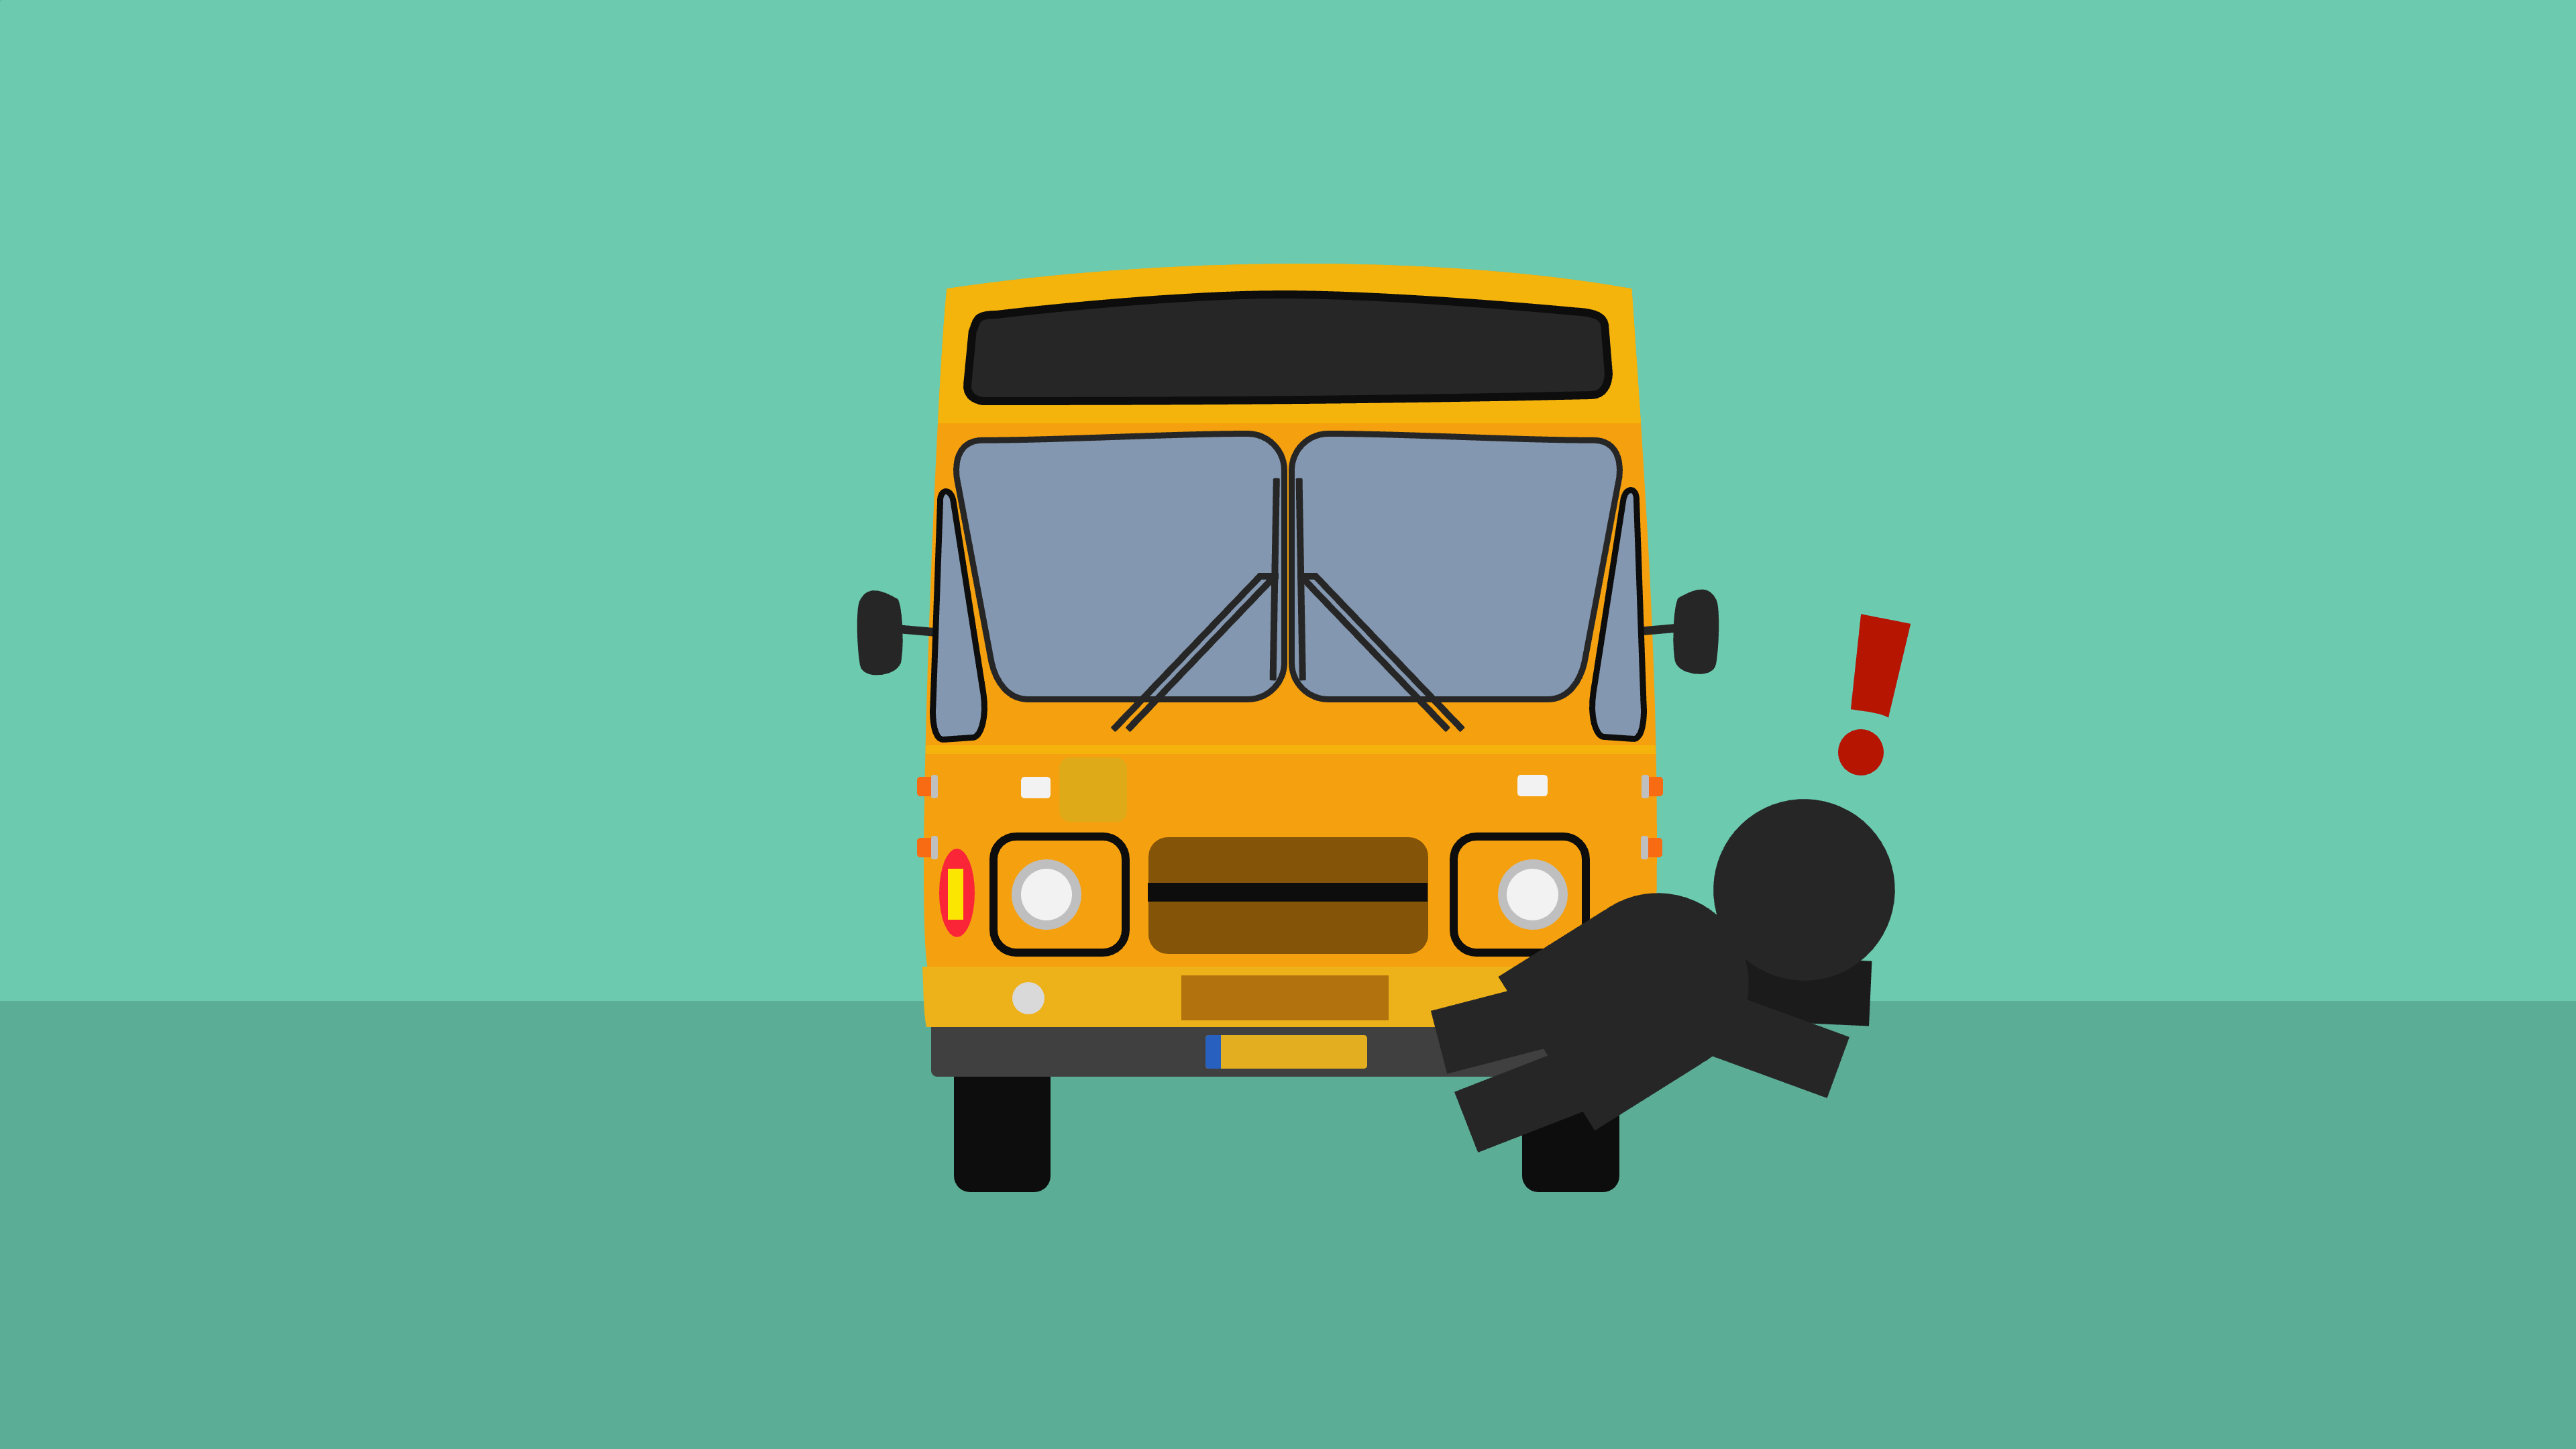 A bus is about to hit a pedestrian, who jumps away